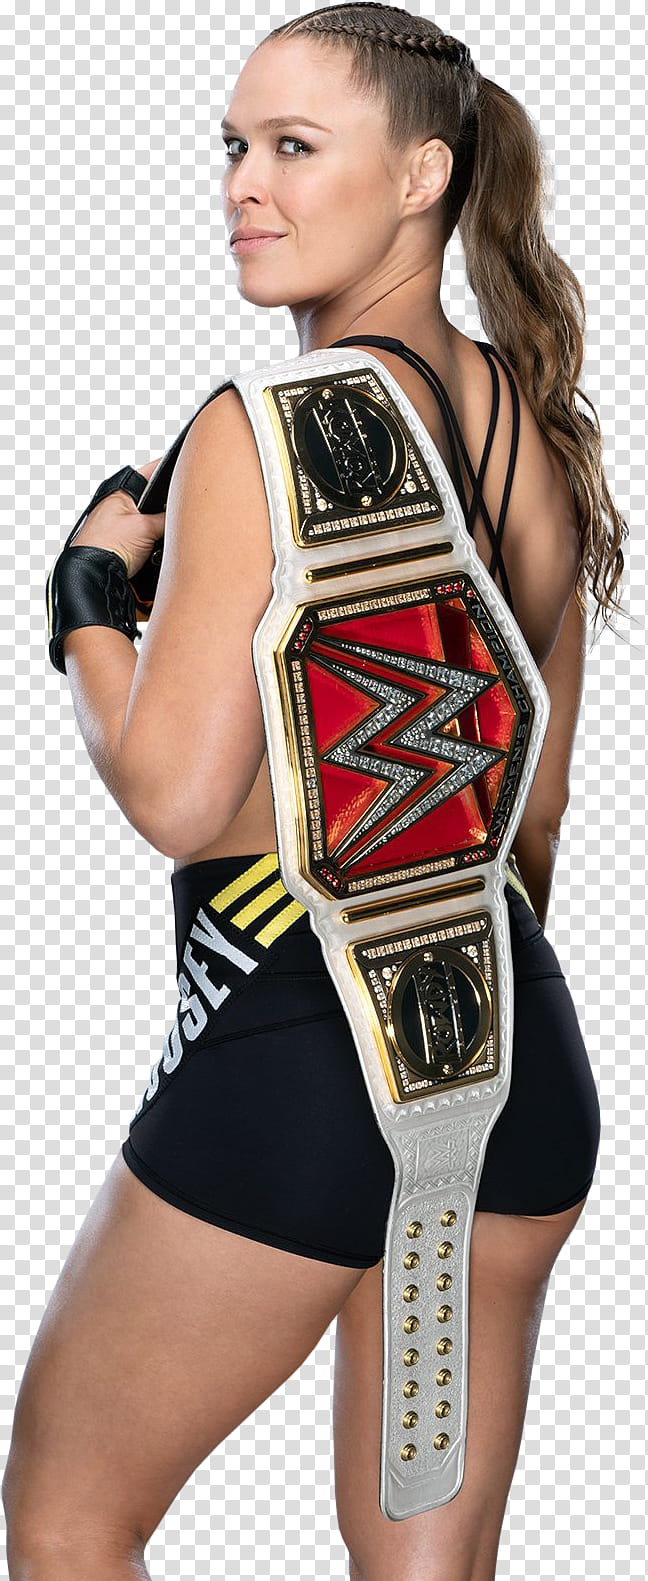 Ronda Rousey RAW Women Champion Render transparent background PNG clipart